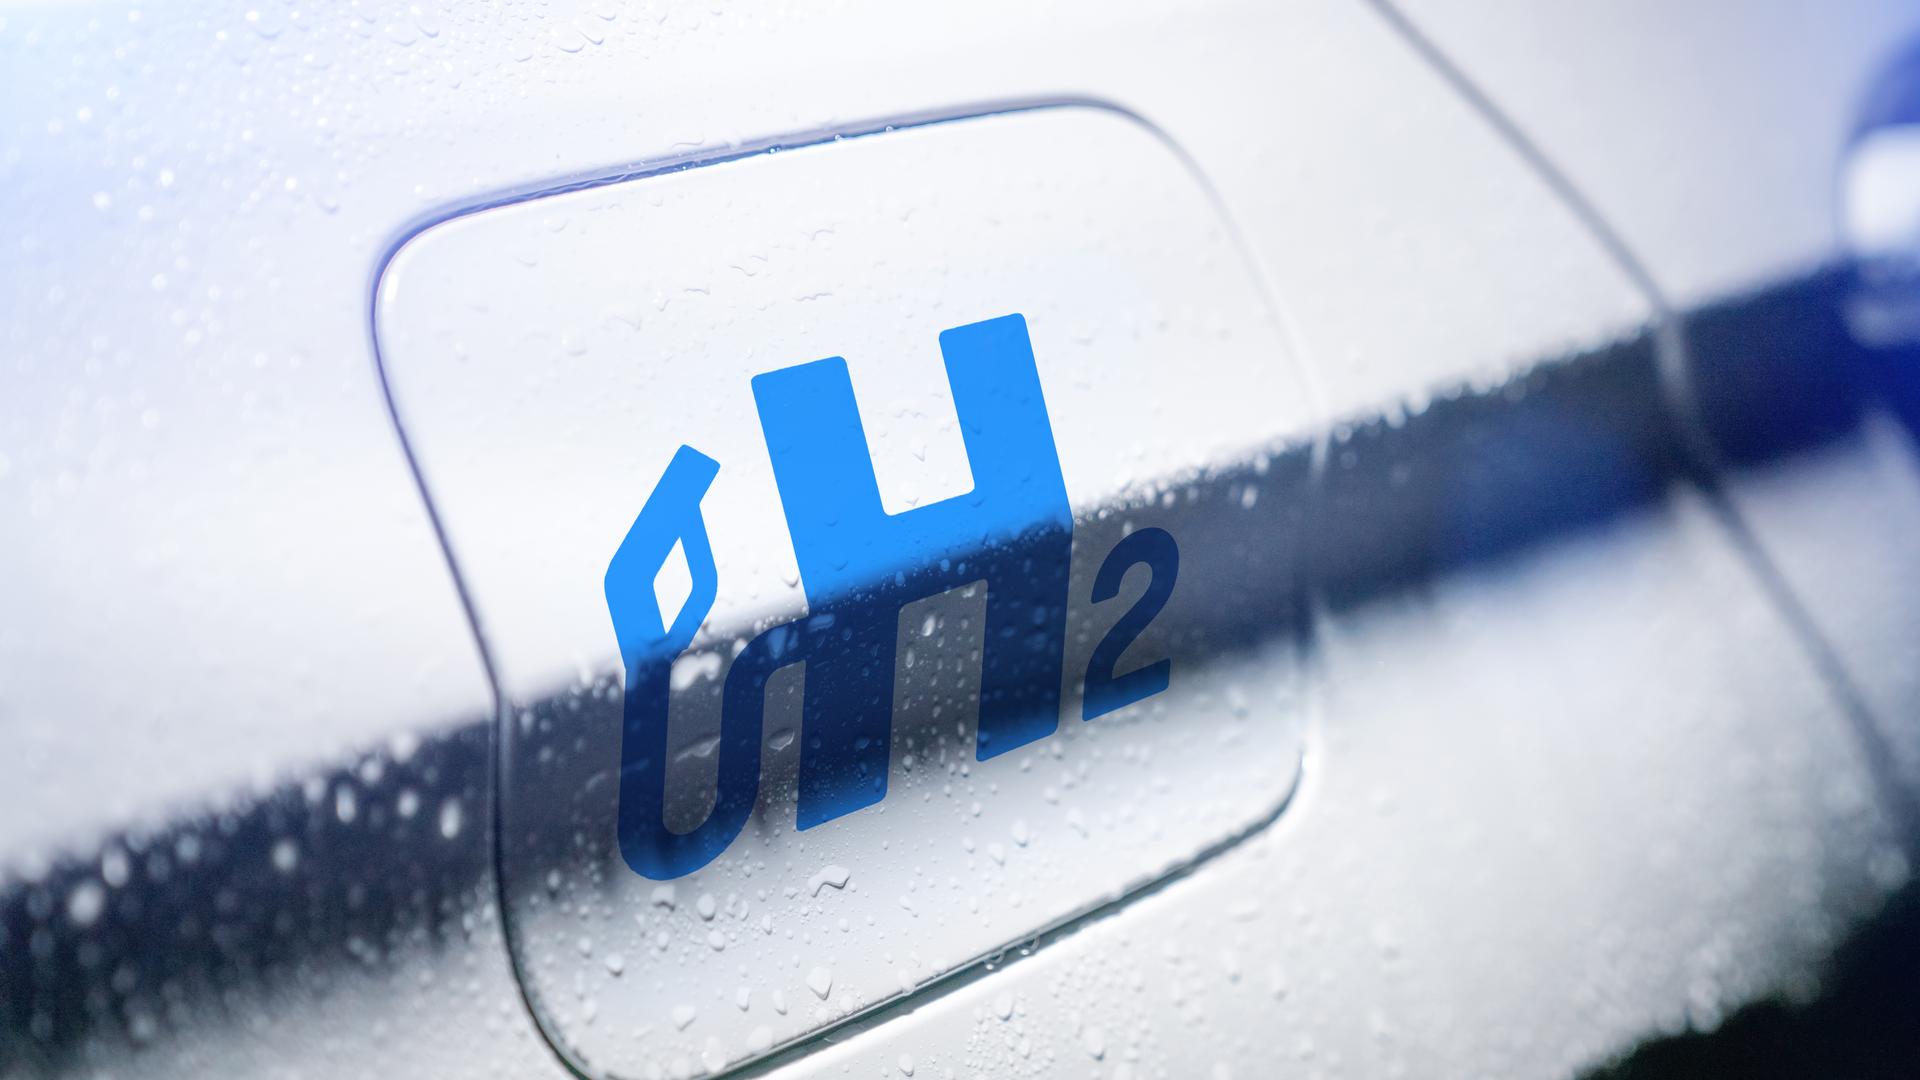 H2Range, H2Assist | Fit4FuelCell | AE Driven Solutions GmbH